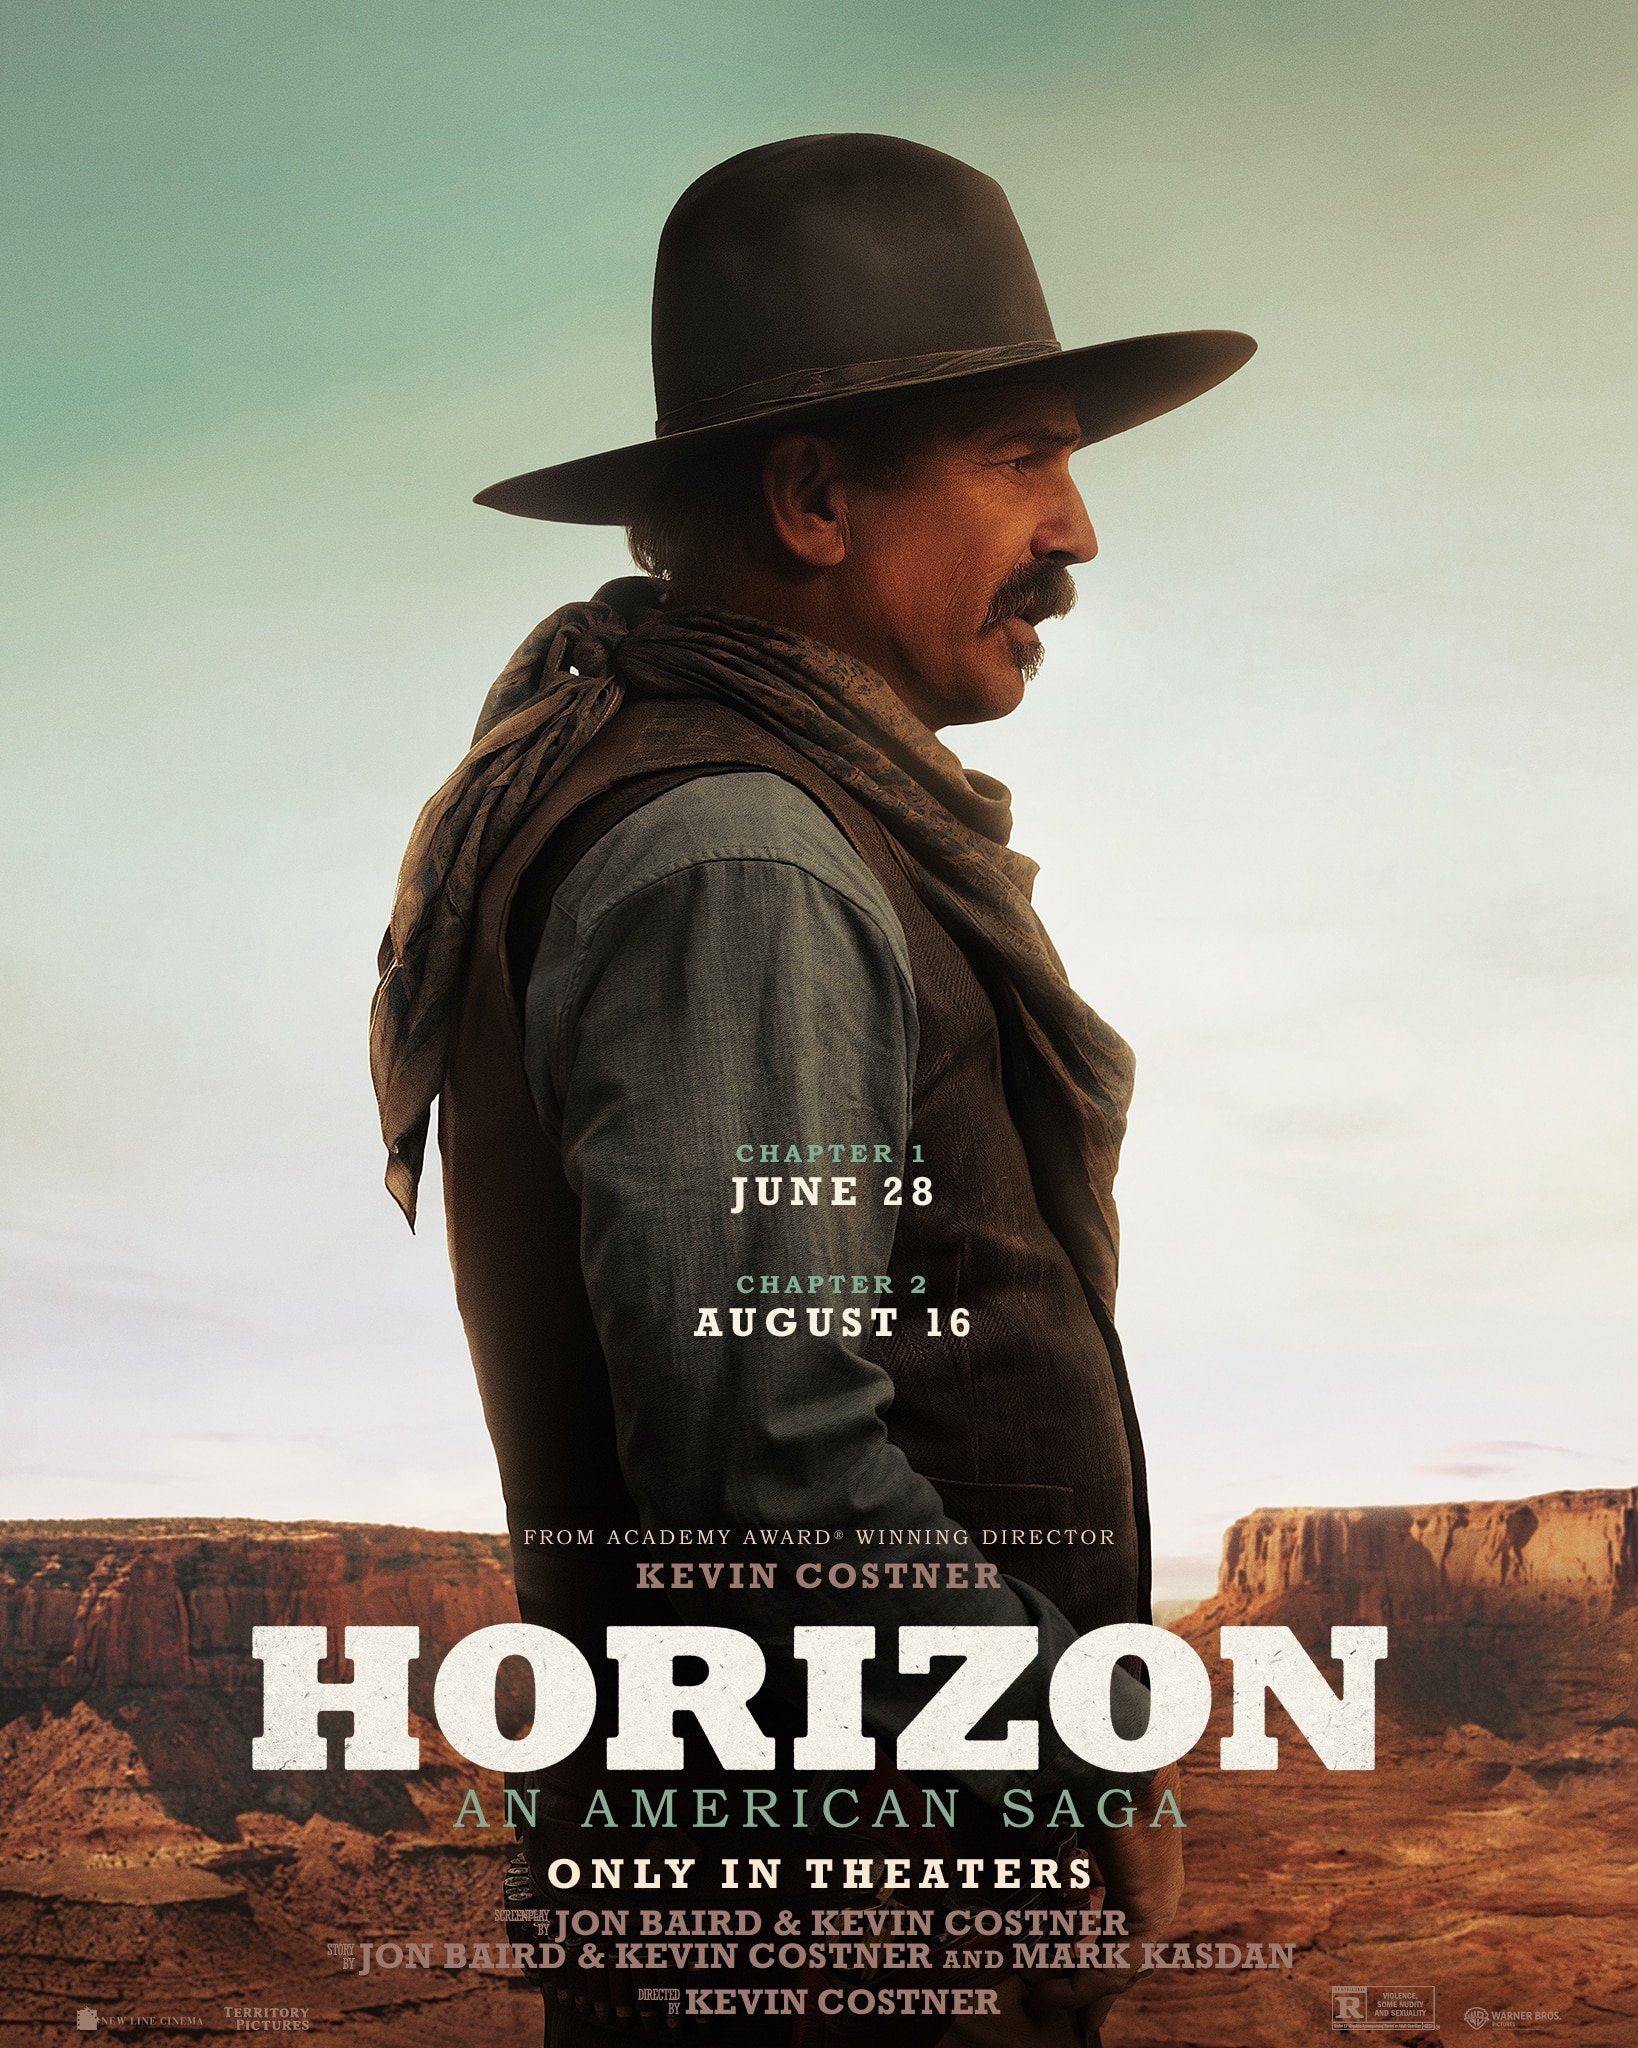 Poster for Kevin Costner's Horizon movie